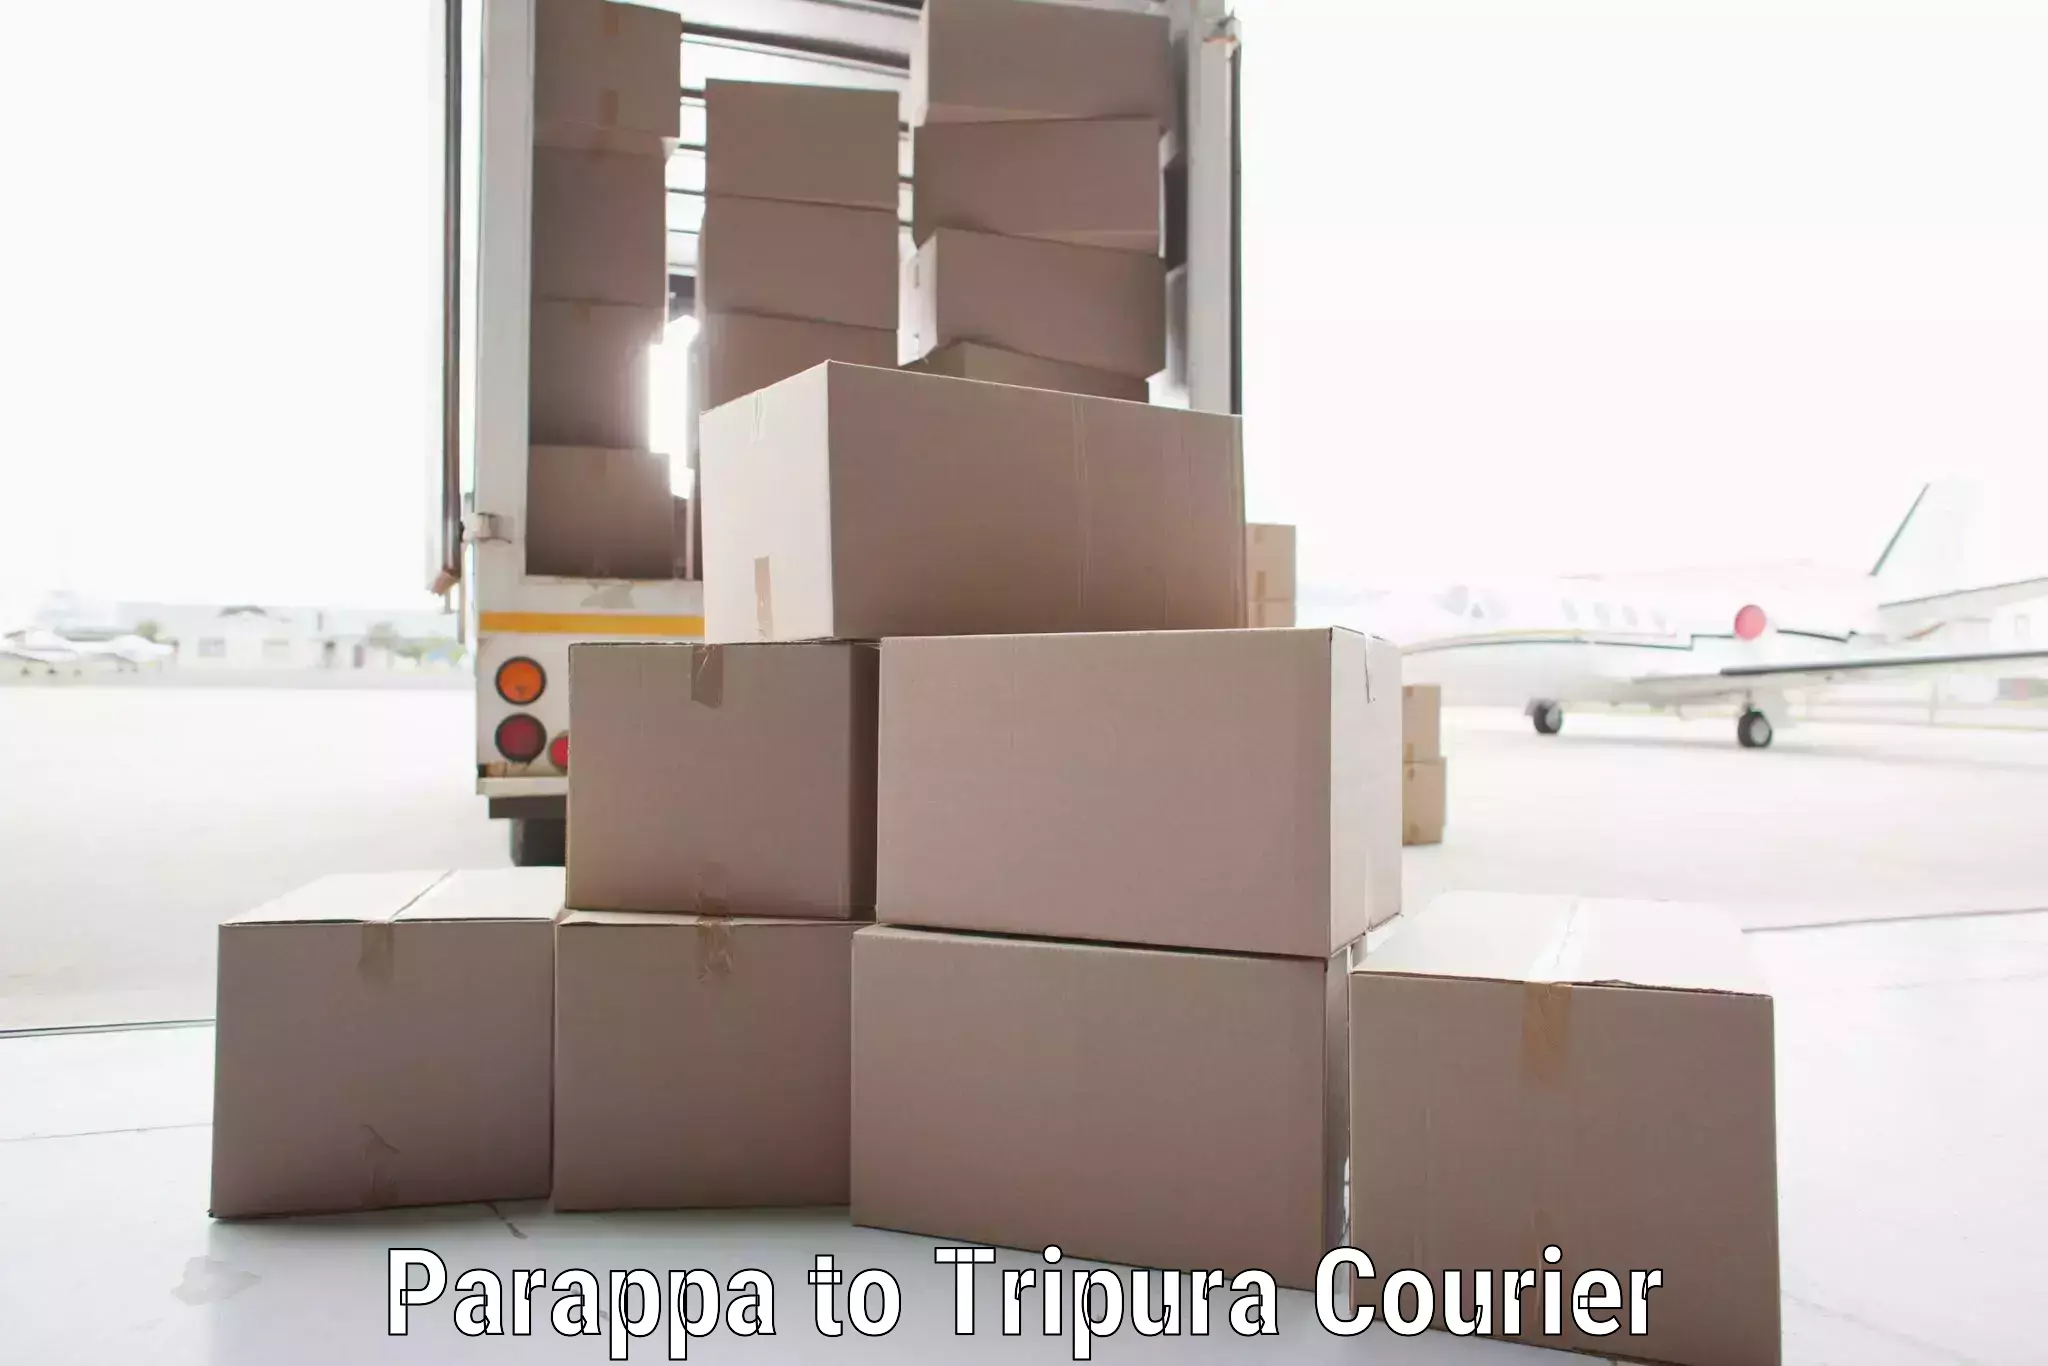 Pharmaceutical courier Parappa to Aambasa